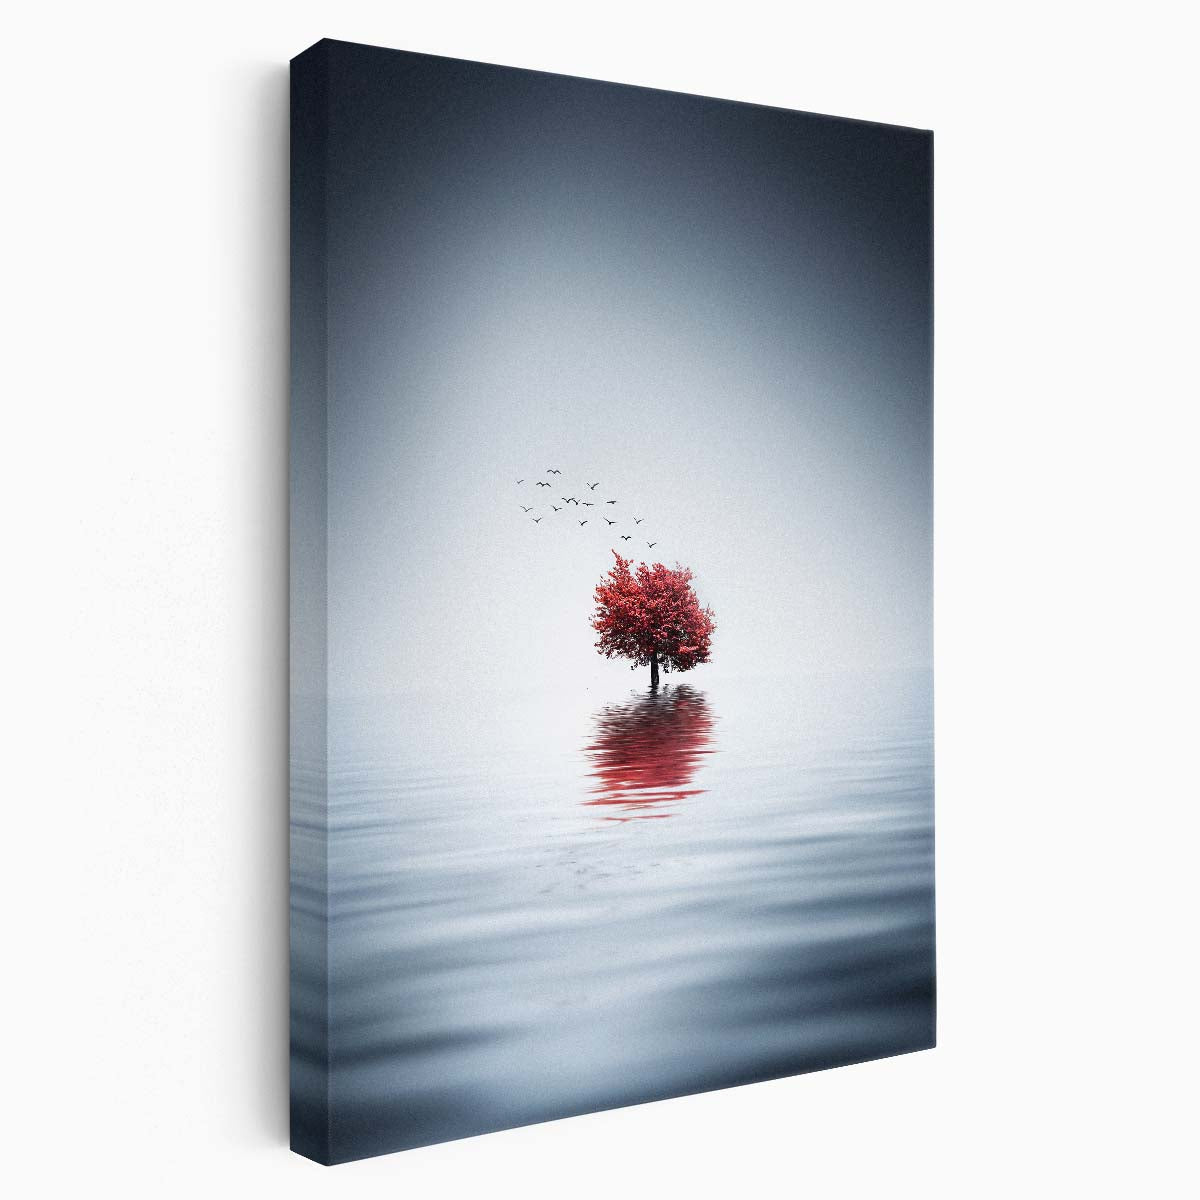 Autumn Tree Reflection in Surreal Blue Lake - Minimalistic Landscape Photography by Luxuriance Designs, made in USA